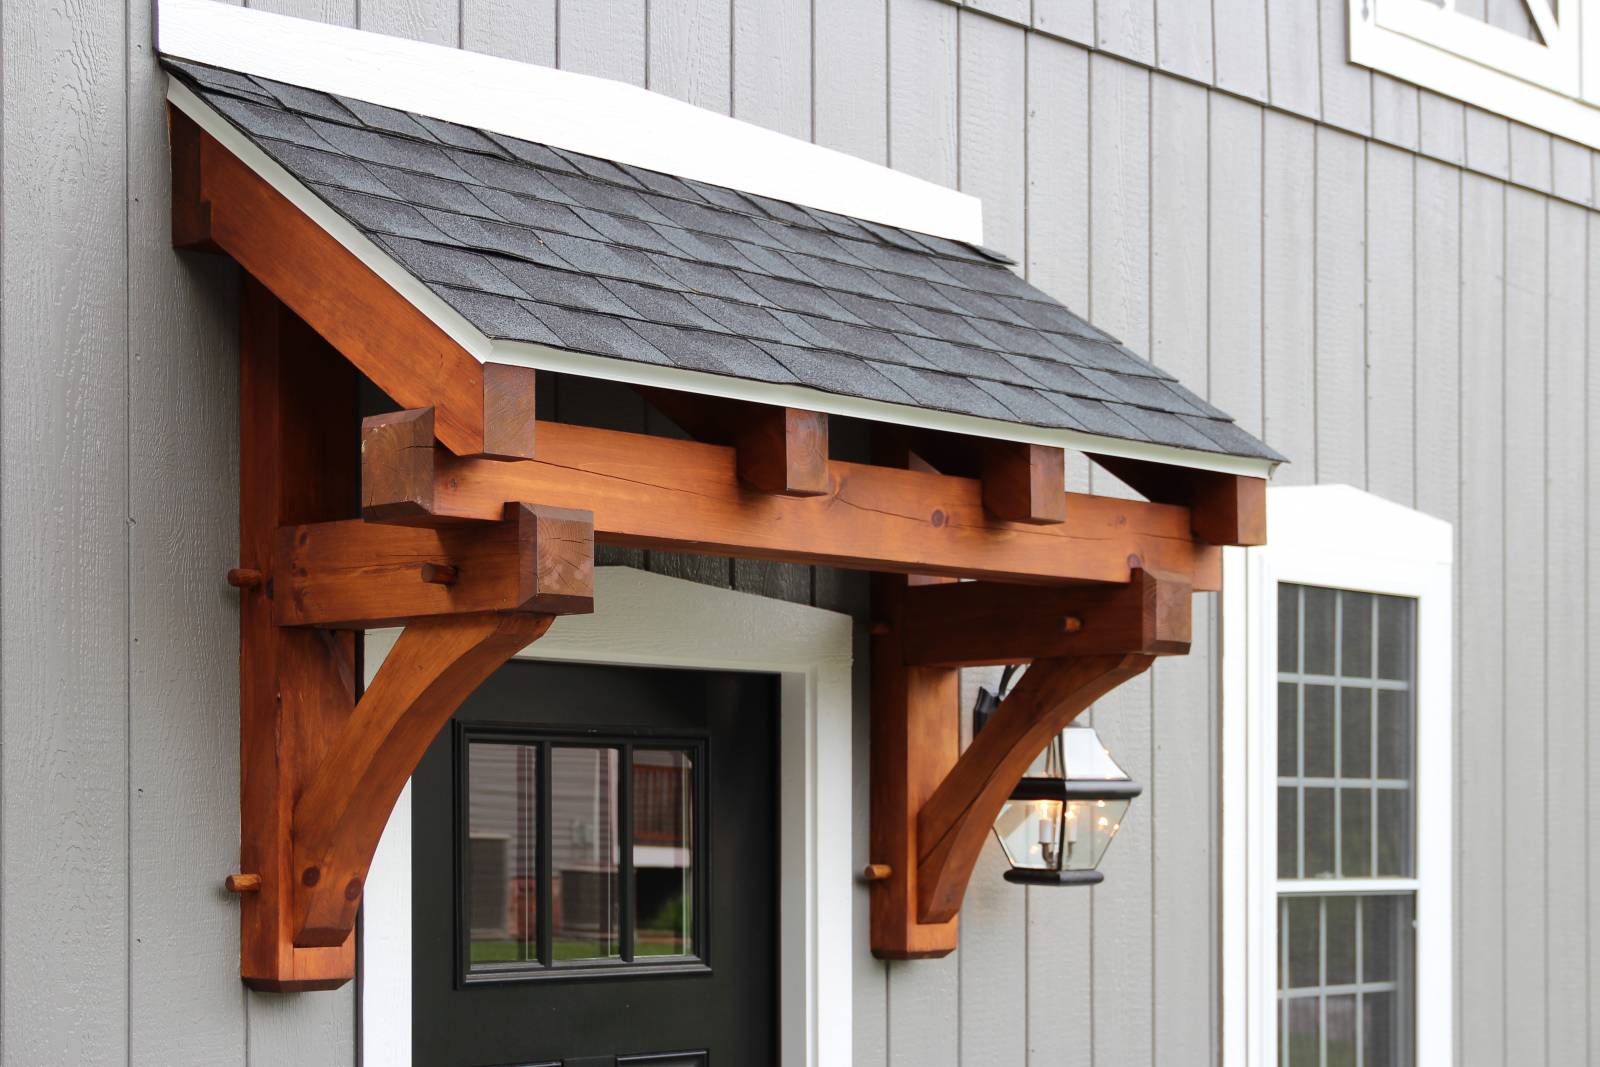 4' Timber Frame Eyebrow Roof with Architectural Shingles